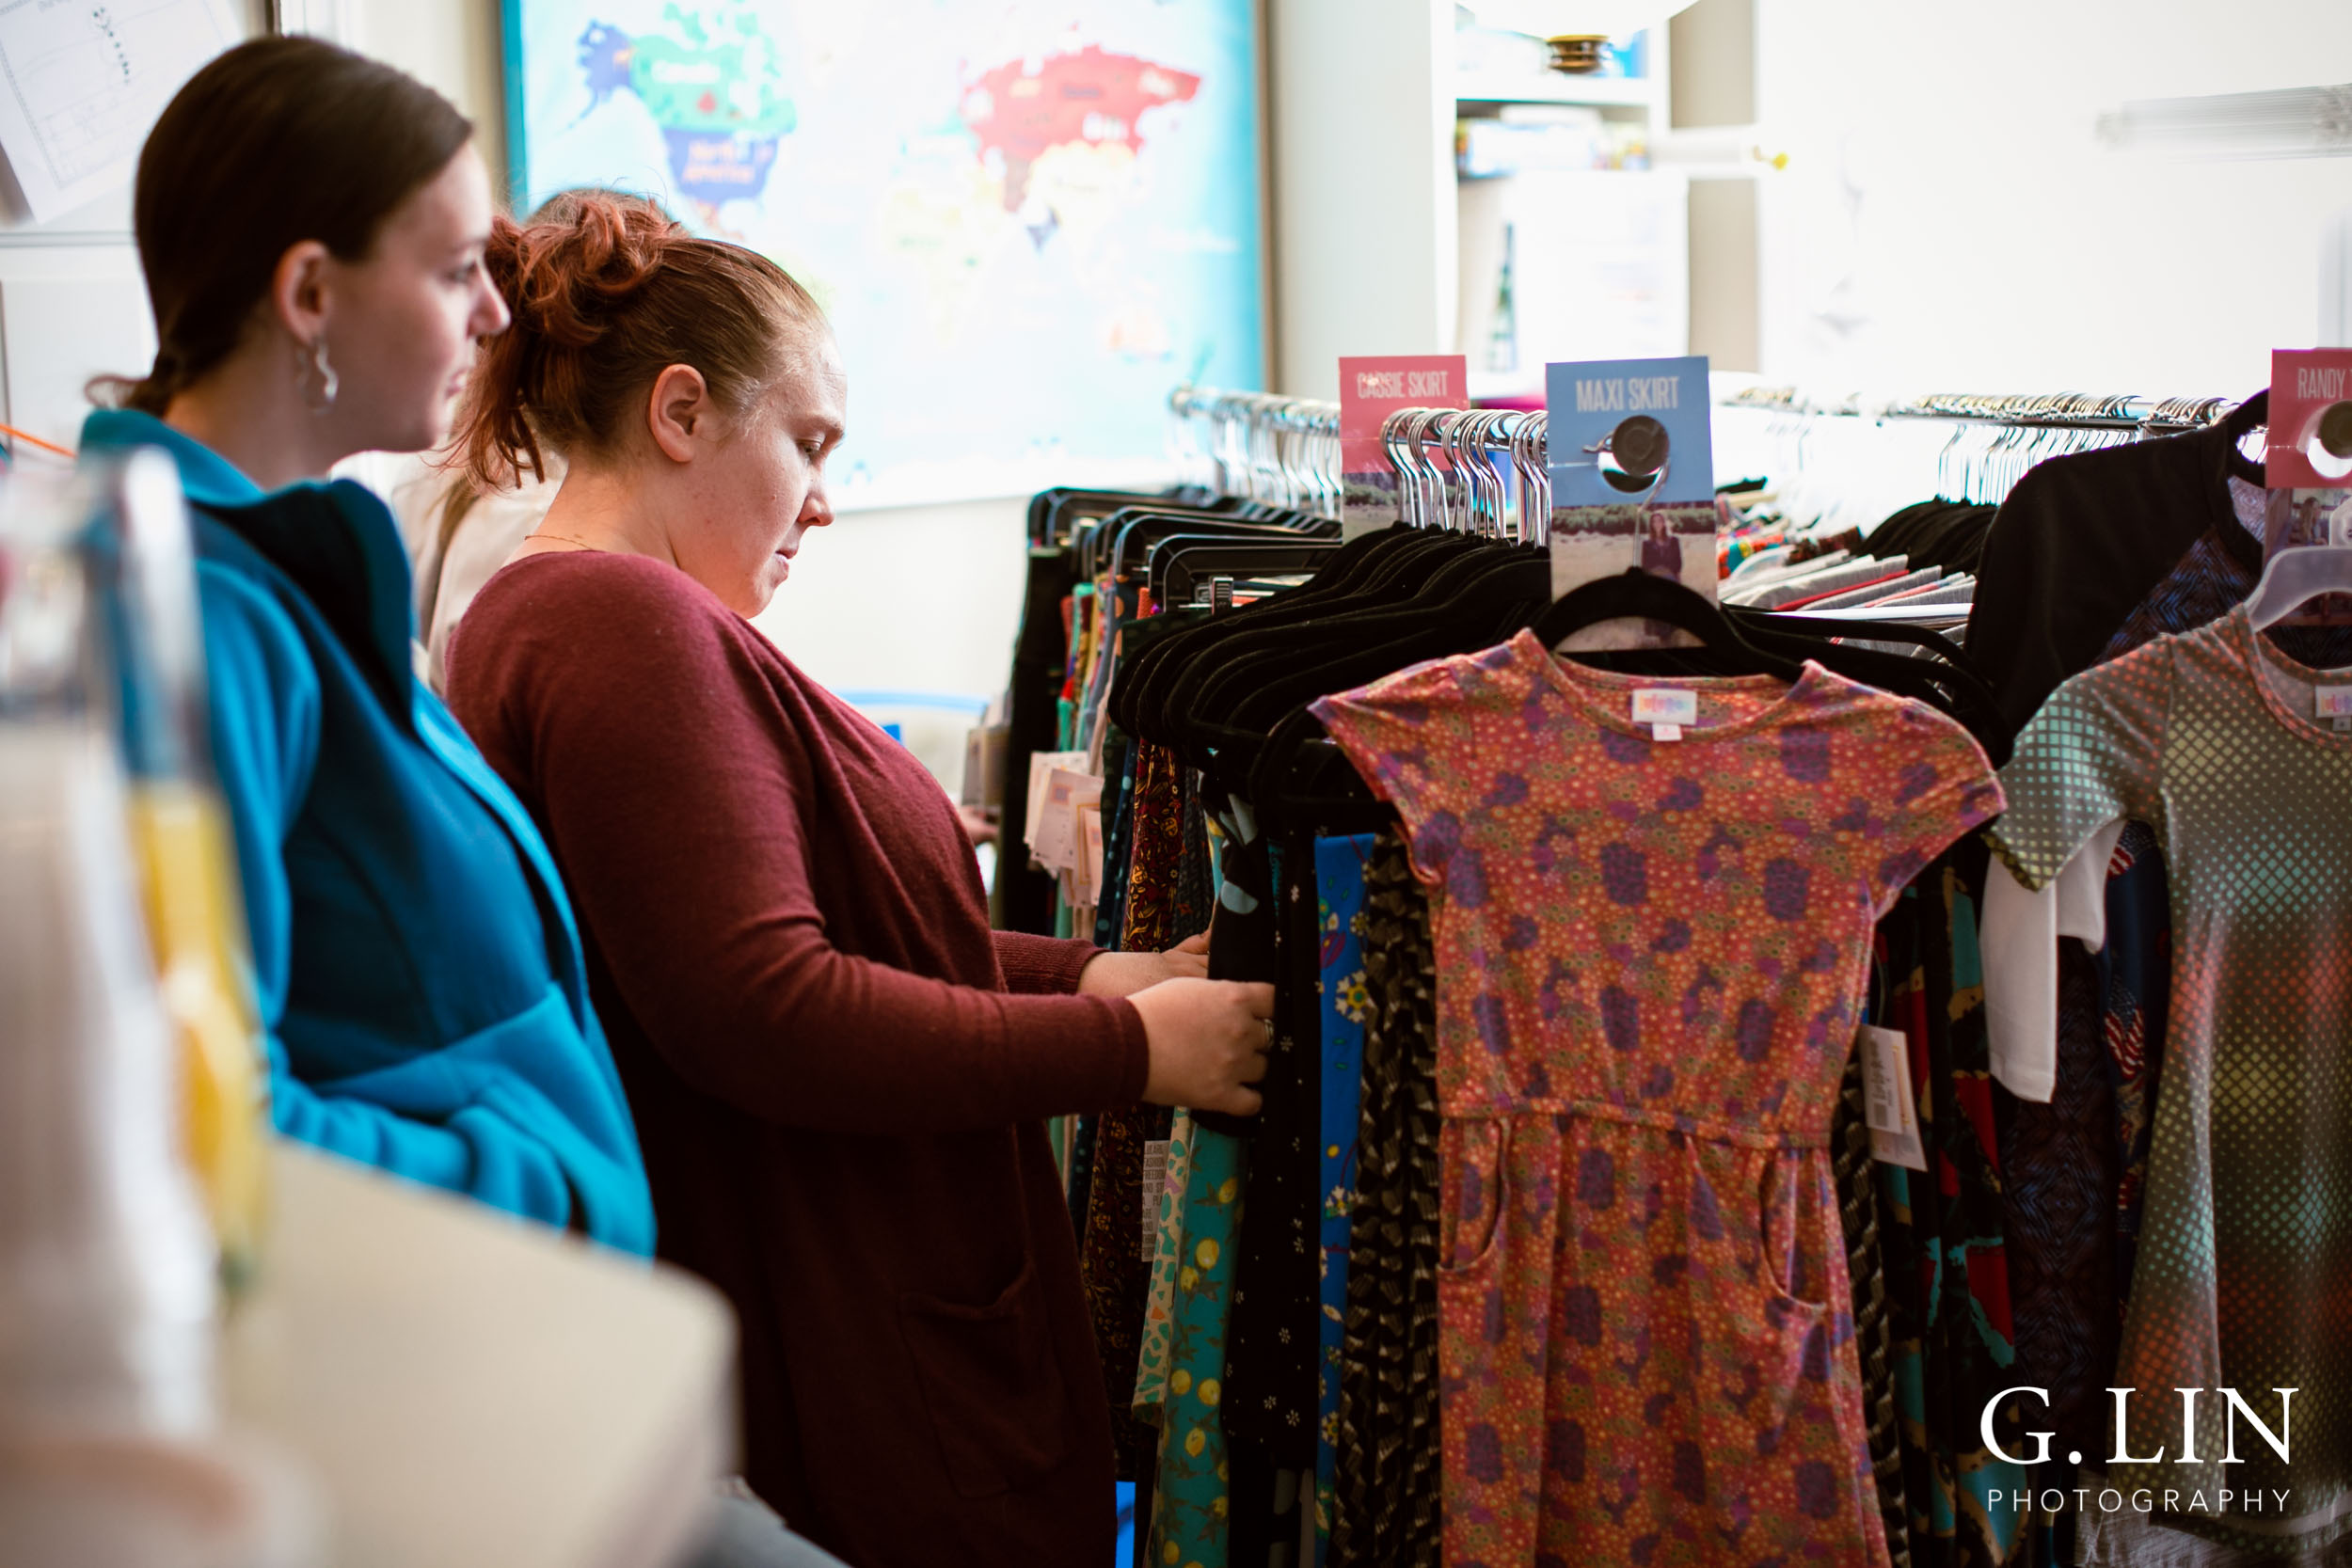 Raleigh Event Photographer | G. Lin Photography | Women browsing at clothing during event